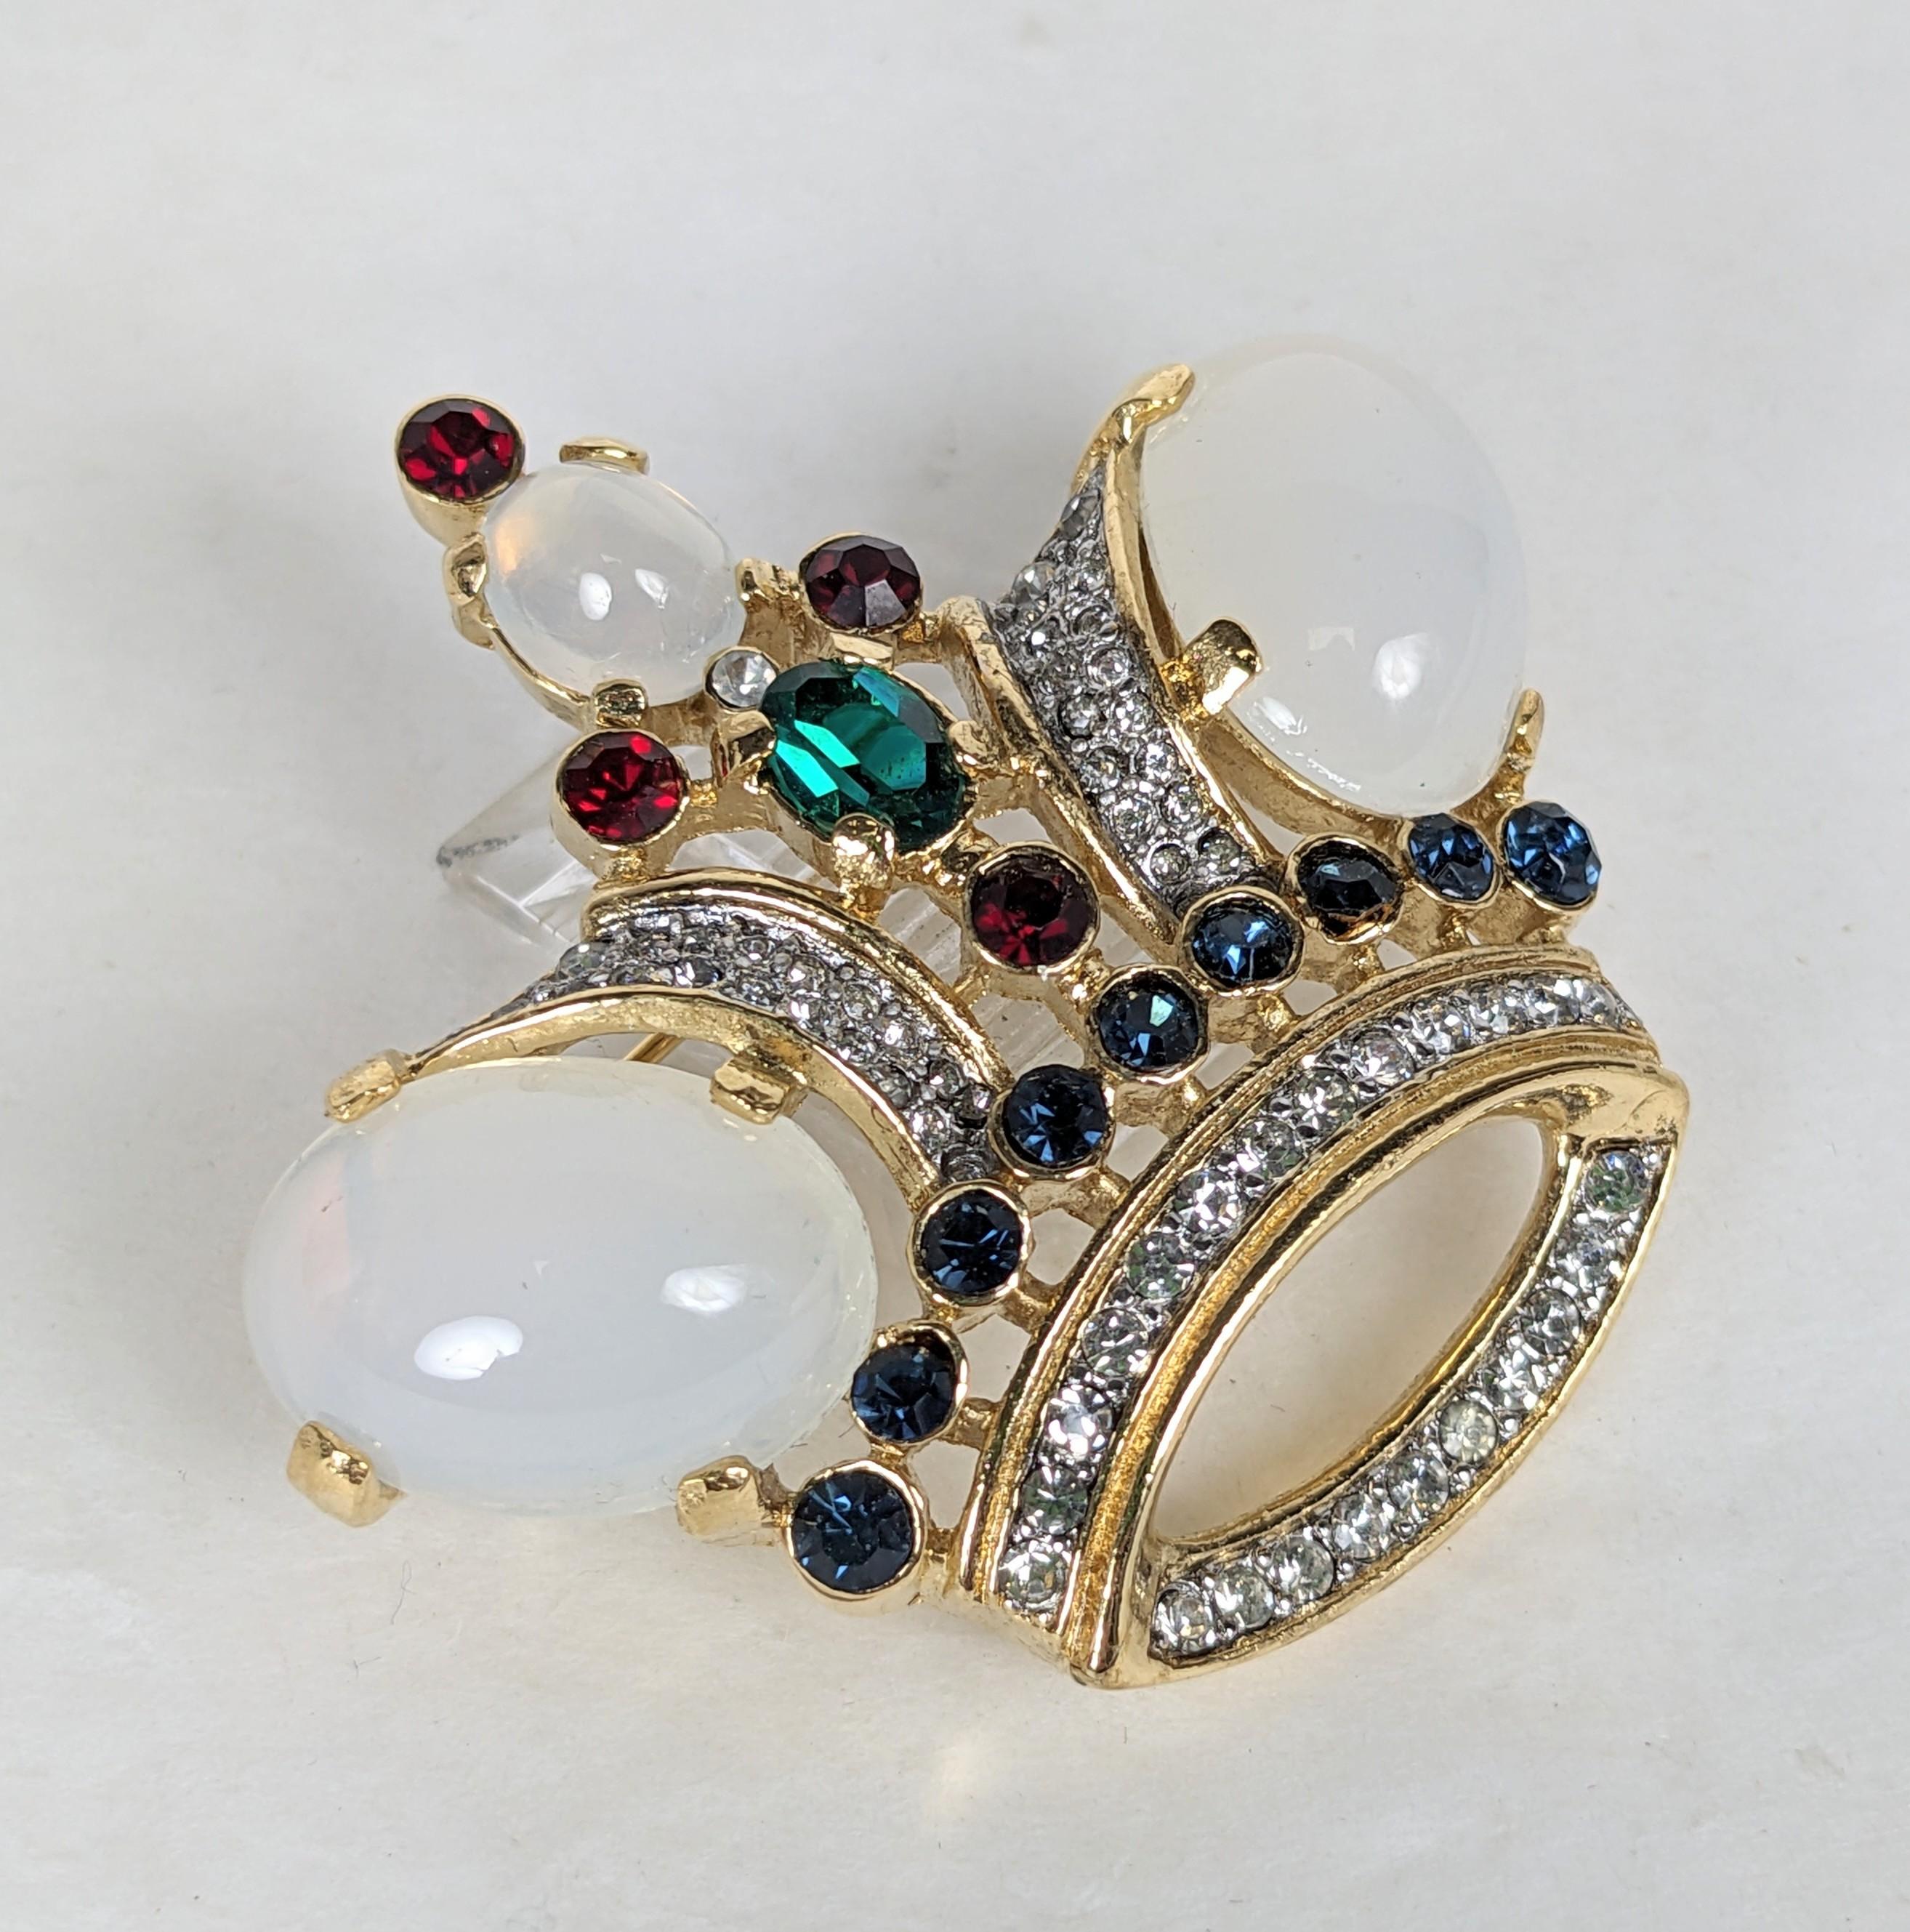 Trifari Moonstone Jeweled Crown from the 1960's. A design from the 1940's remade by Trifari a few decades later. Faux moonstone with red, blue, green crystals on gilt metal with pave rhinestones. 2